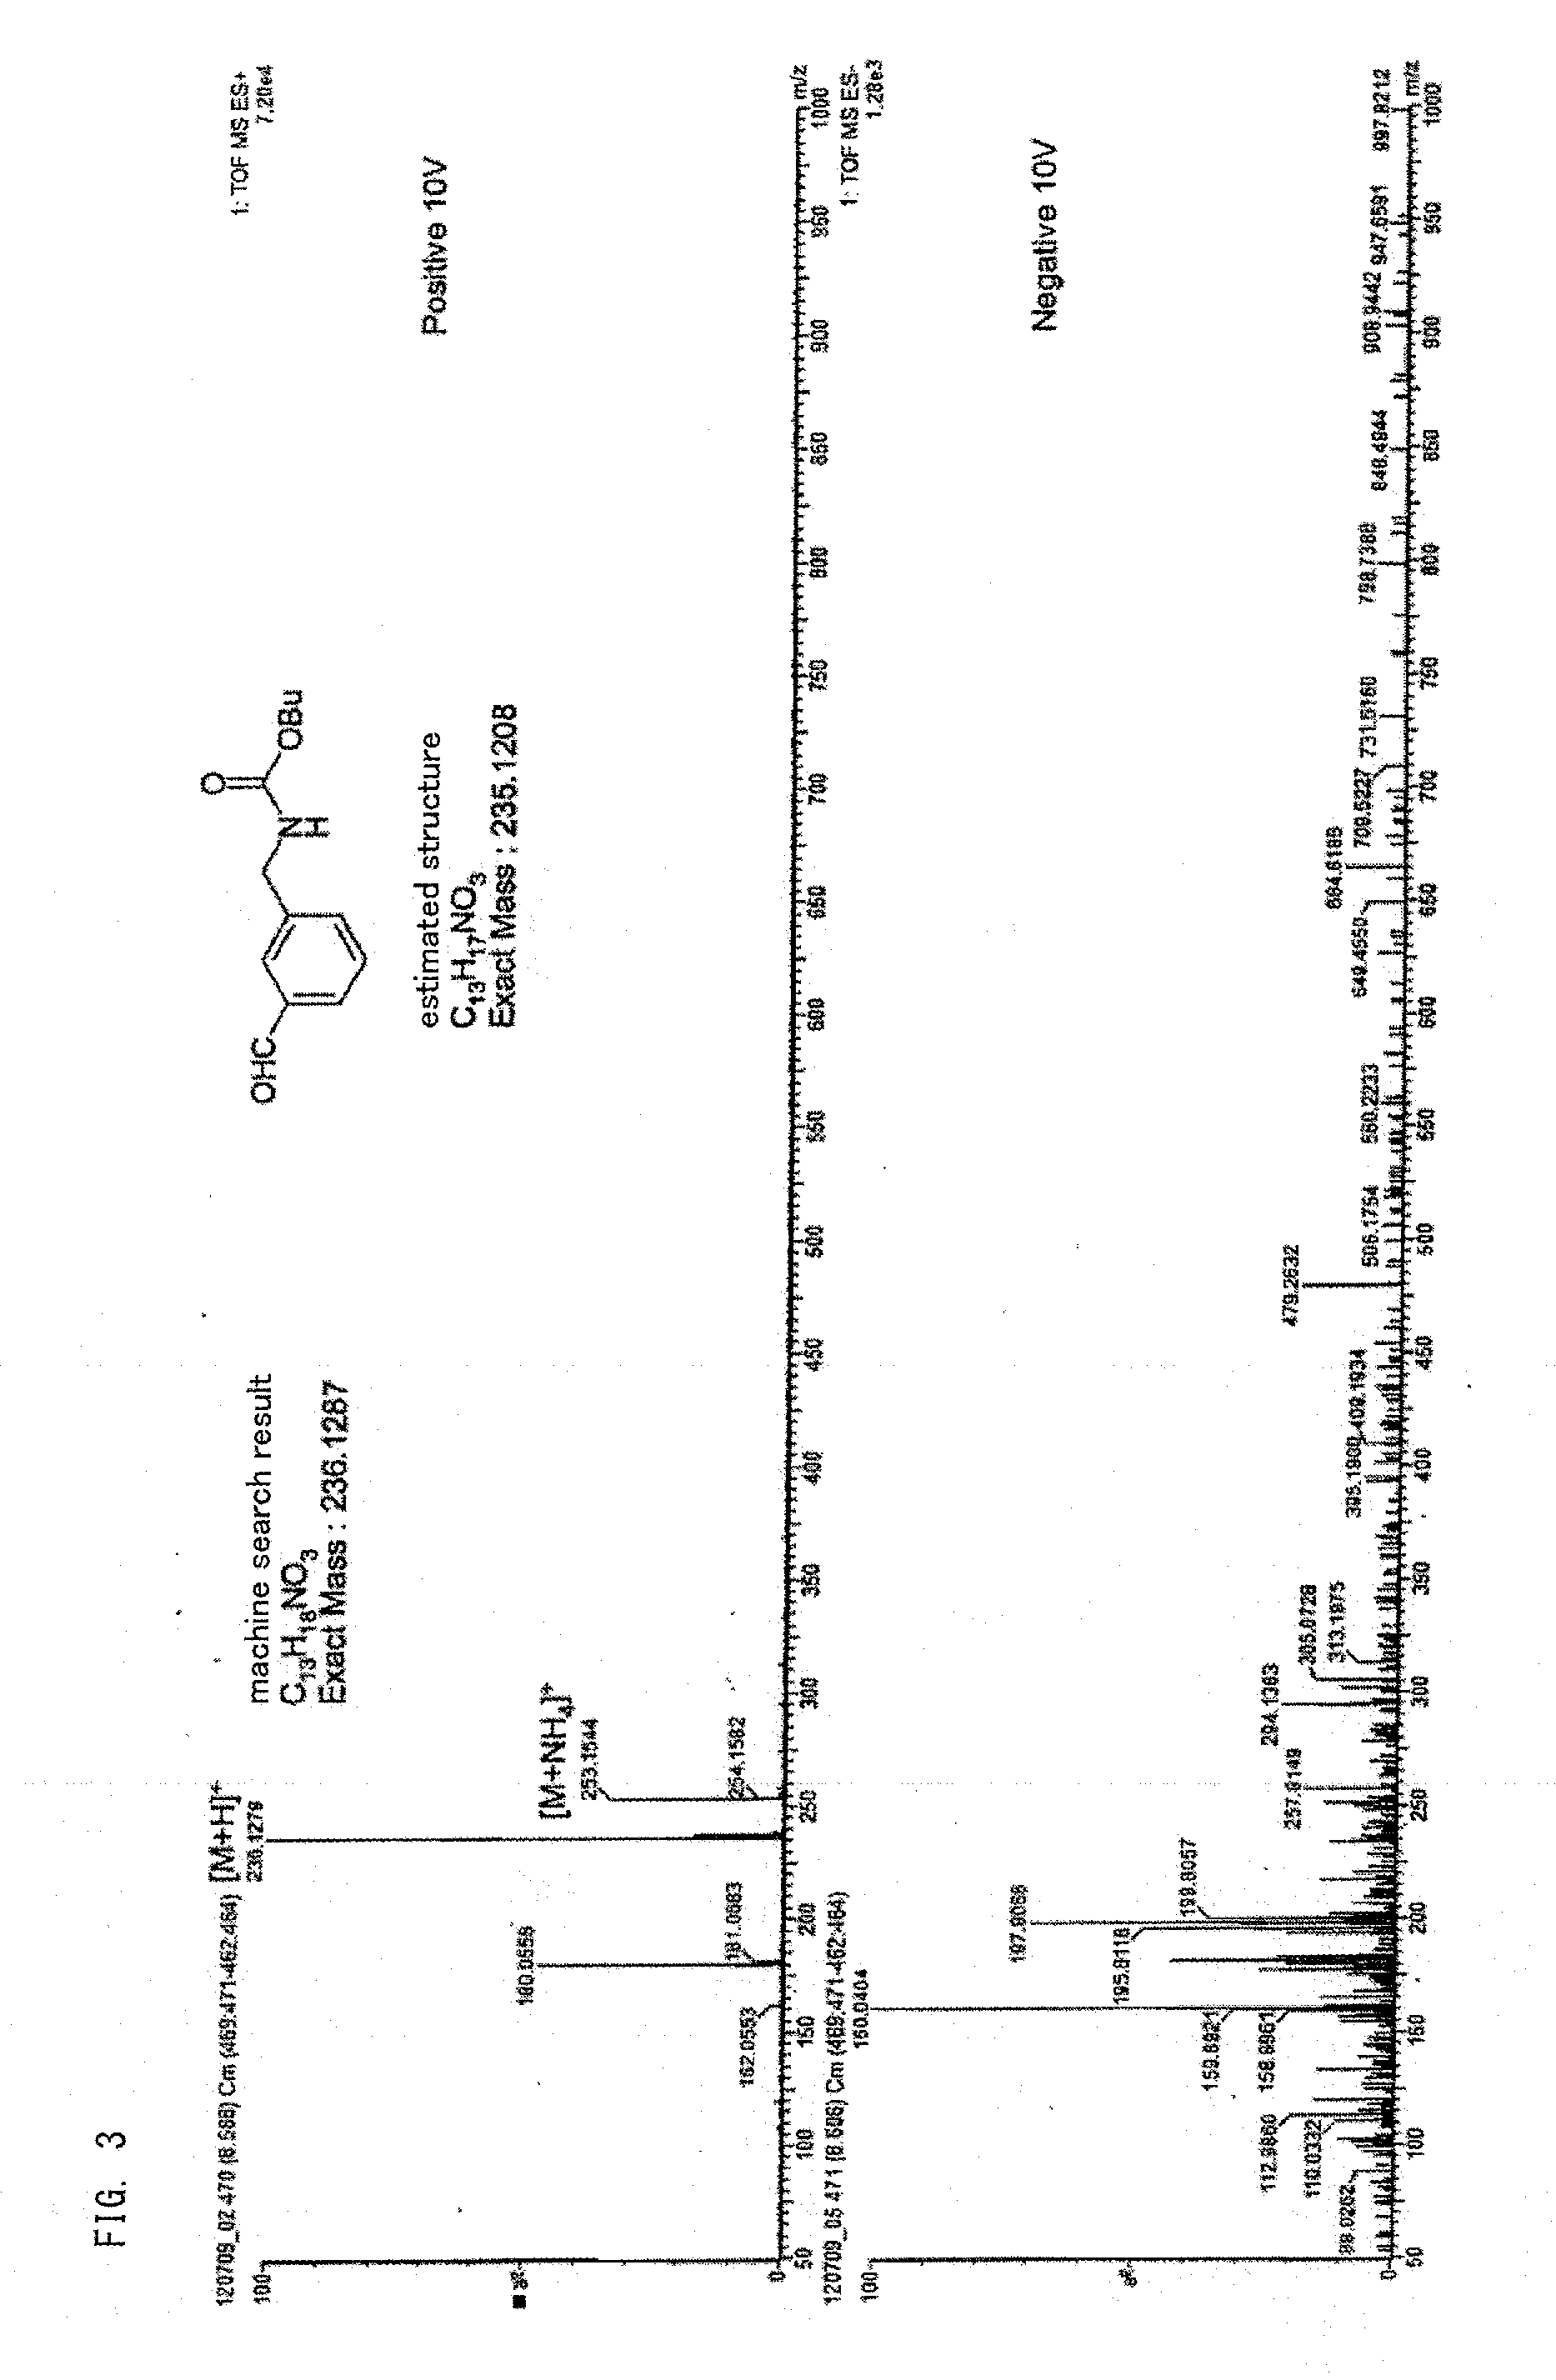 Xylylene dicarbamate, method for producing xylylene diisocyanate, xylylene diisocyanate, and method for reserving xylylene dicarbamate